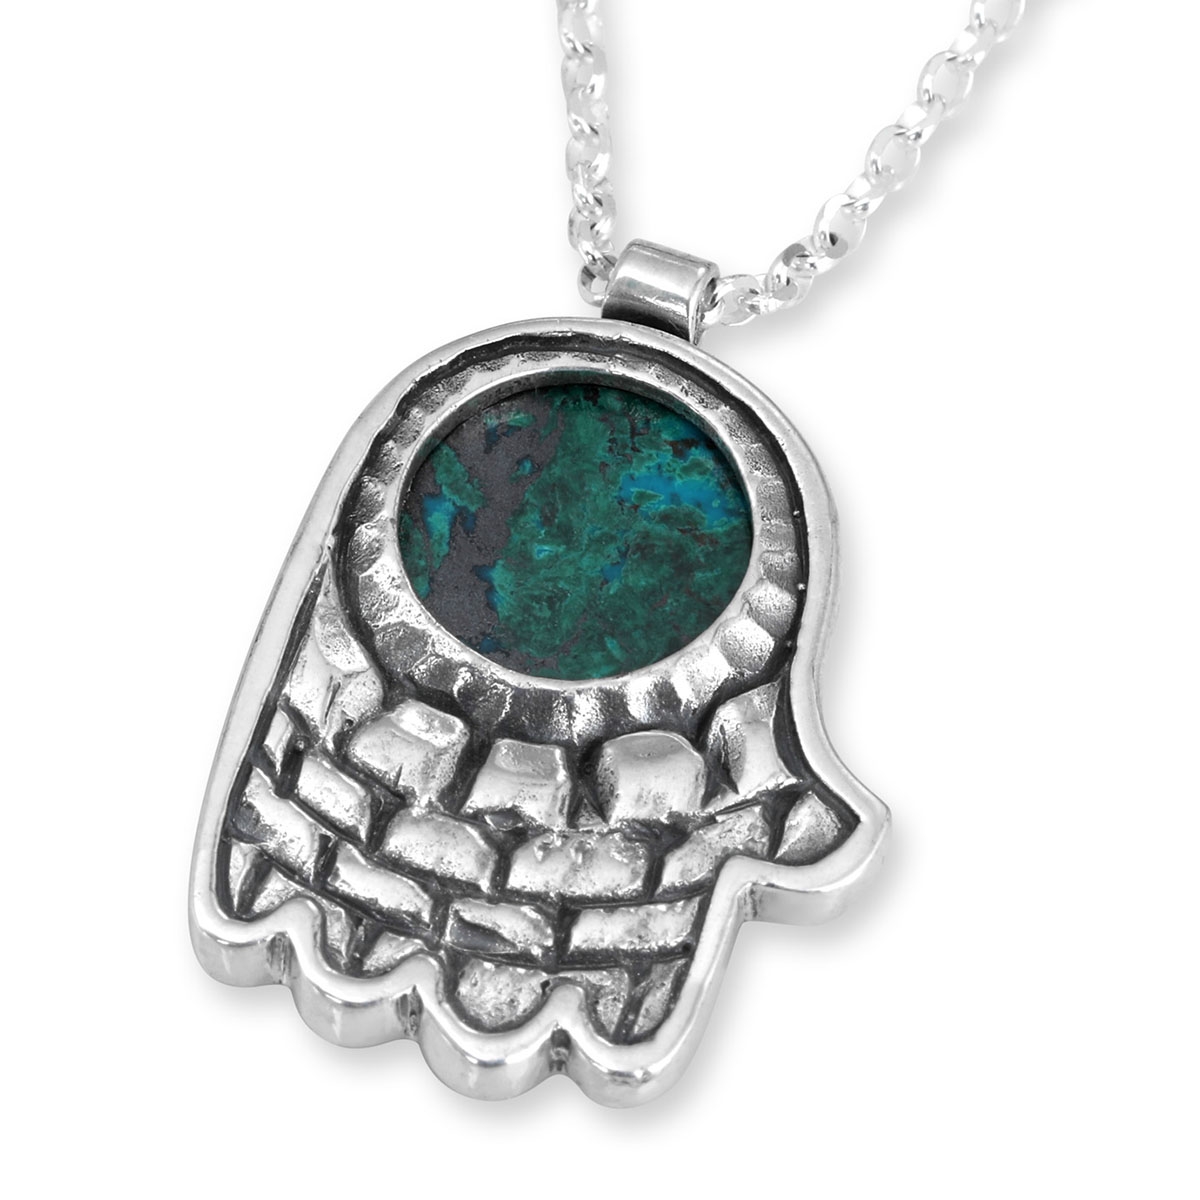 Sterling Silver and Eilat Stone Hamsa Necklace With Old Jerusalem Motif - 1